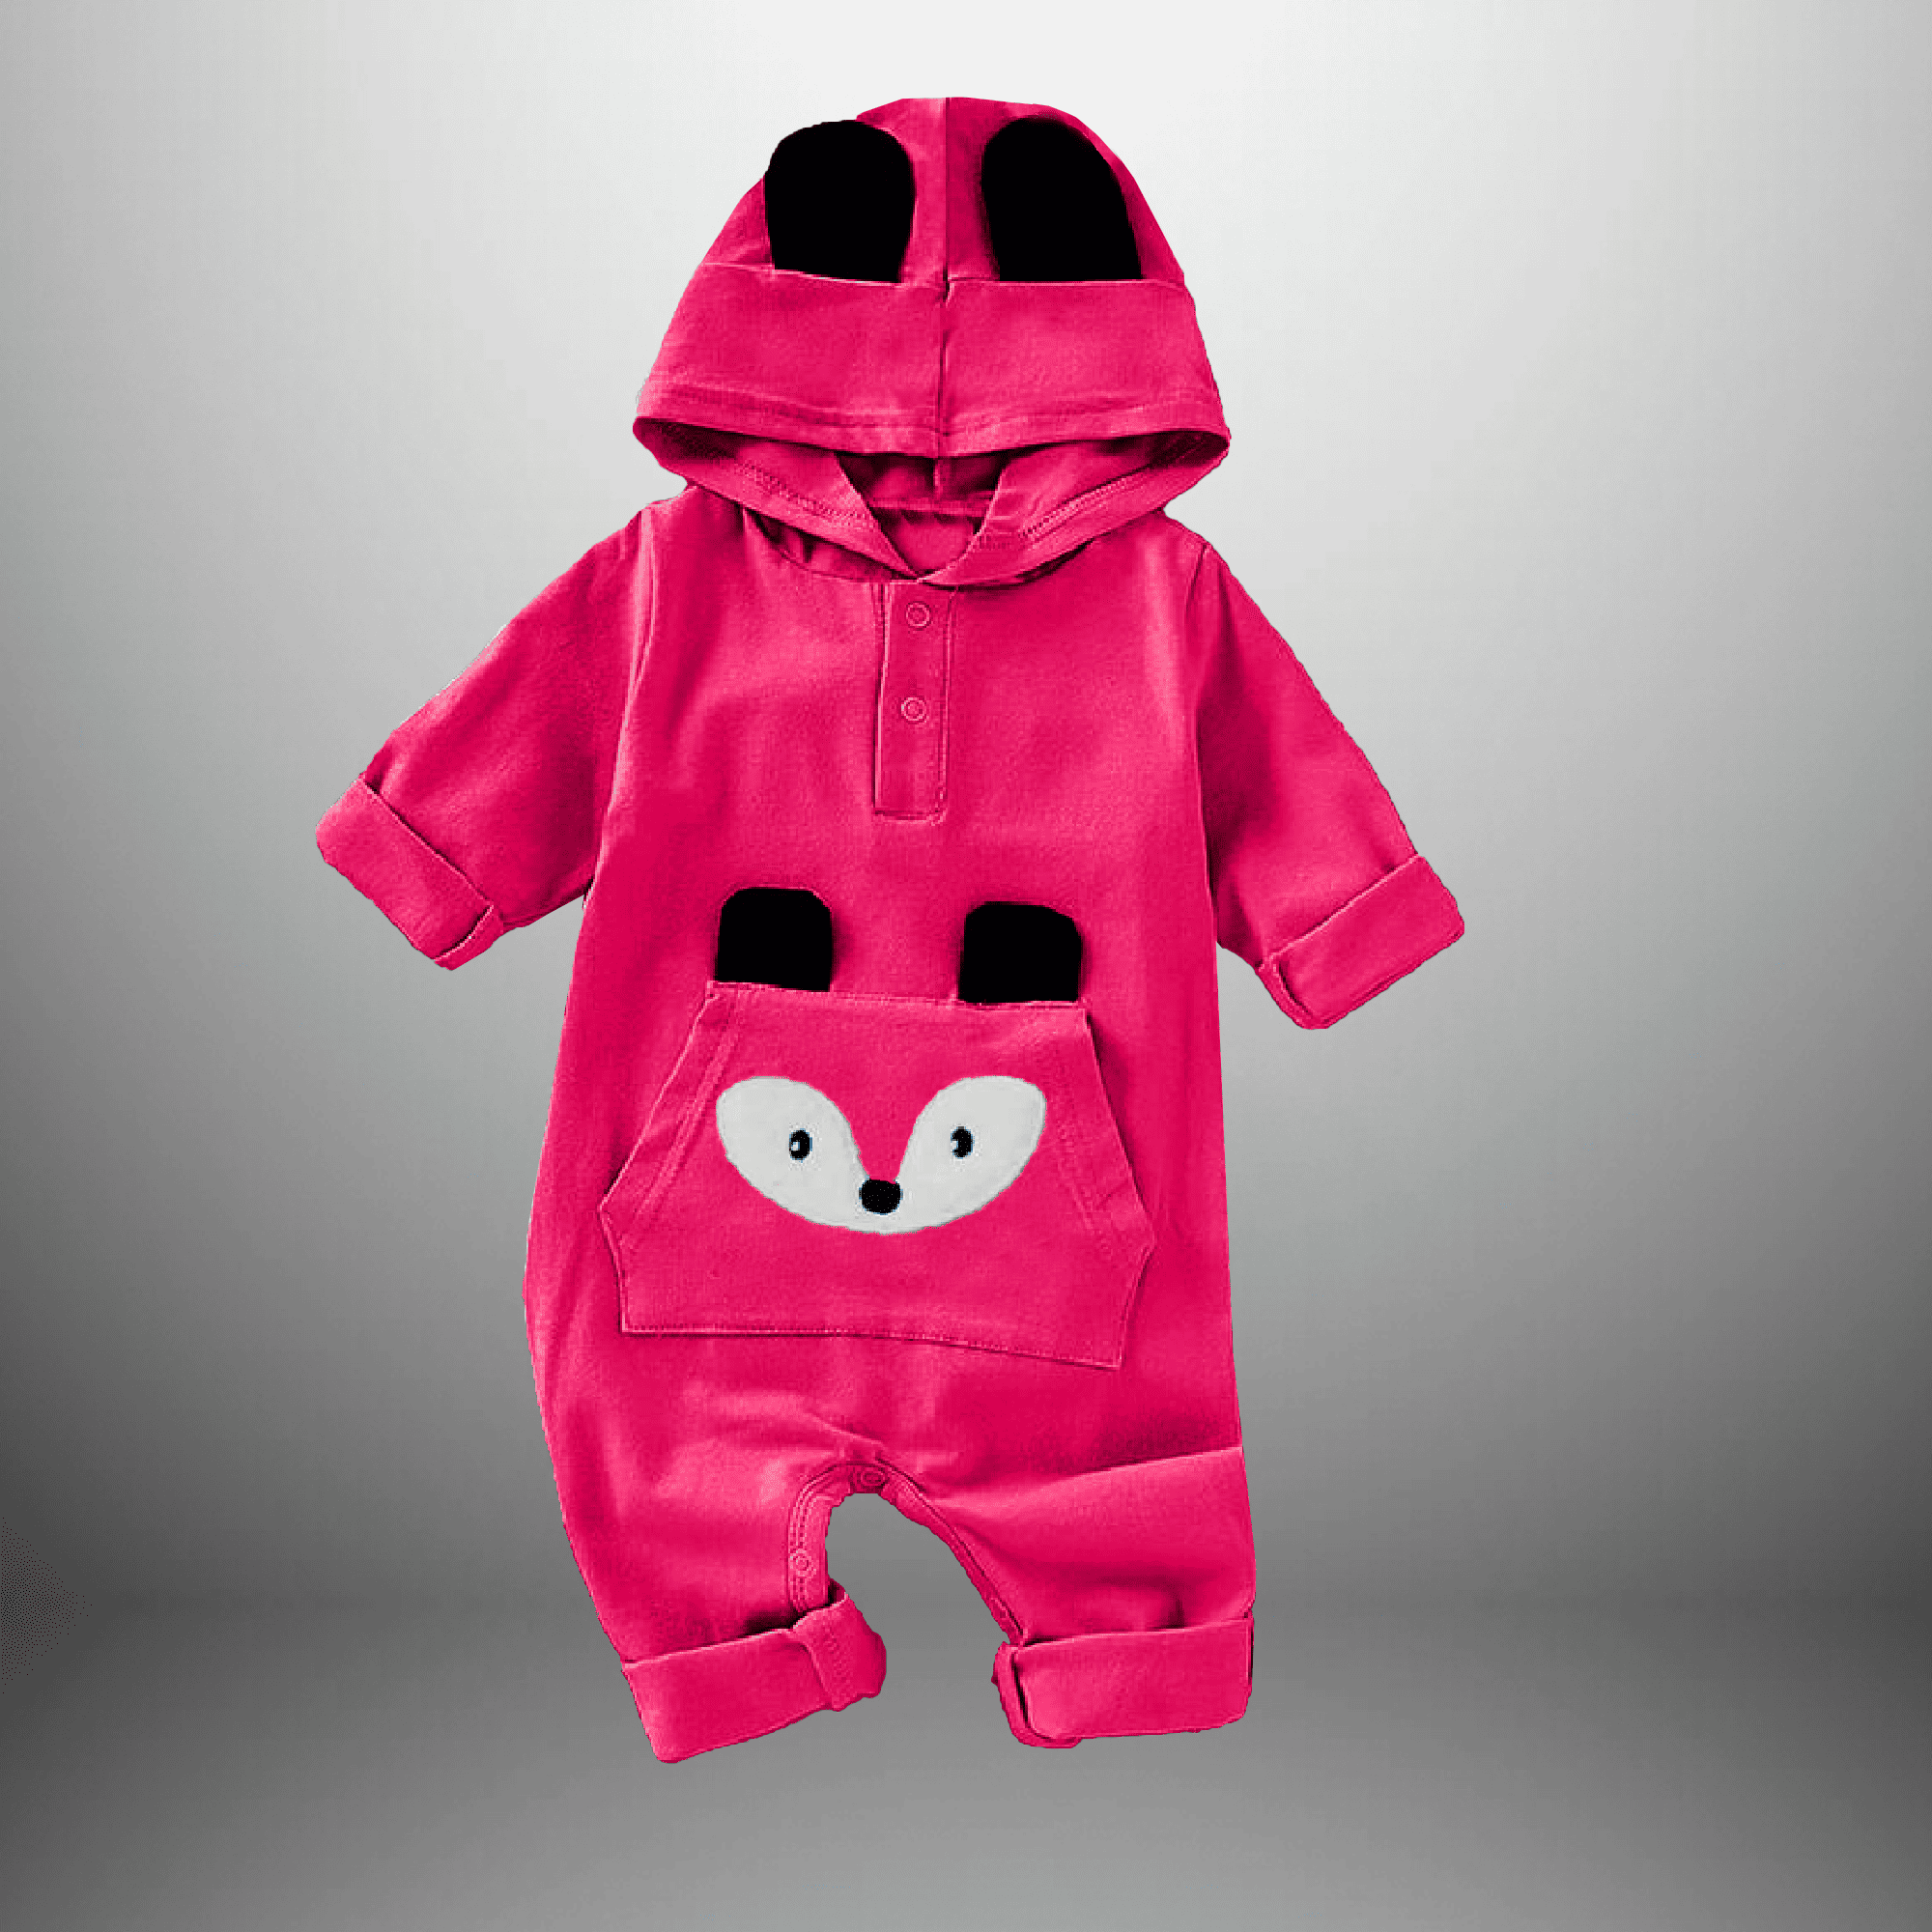 Toddler's Pink hooded Romper with front pocket-RKFCTT102